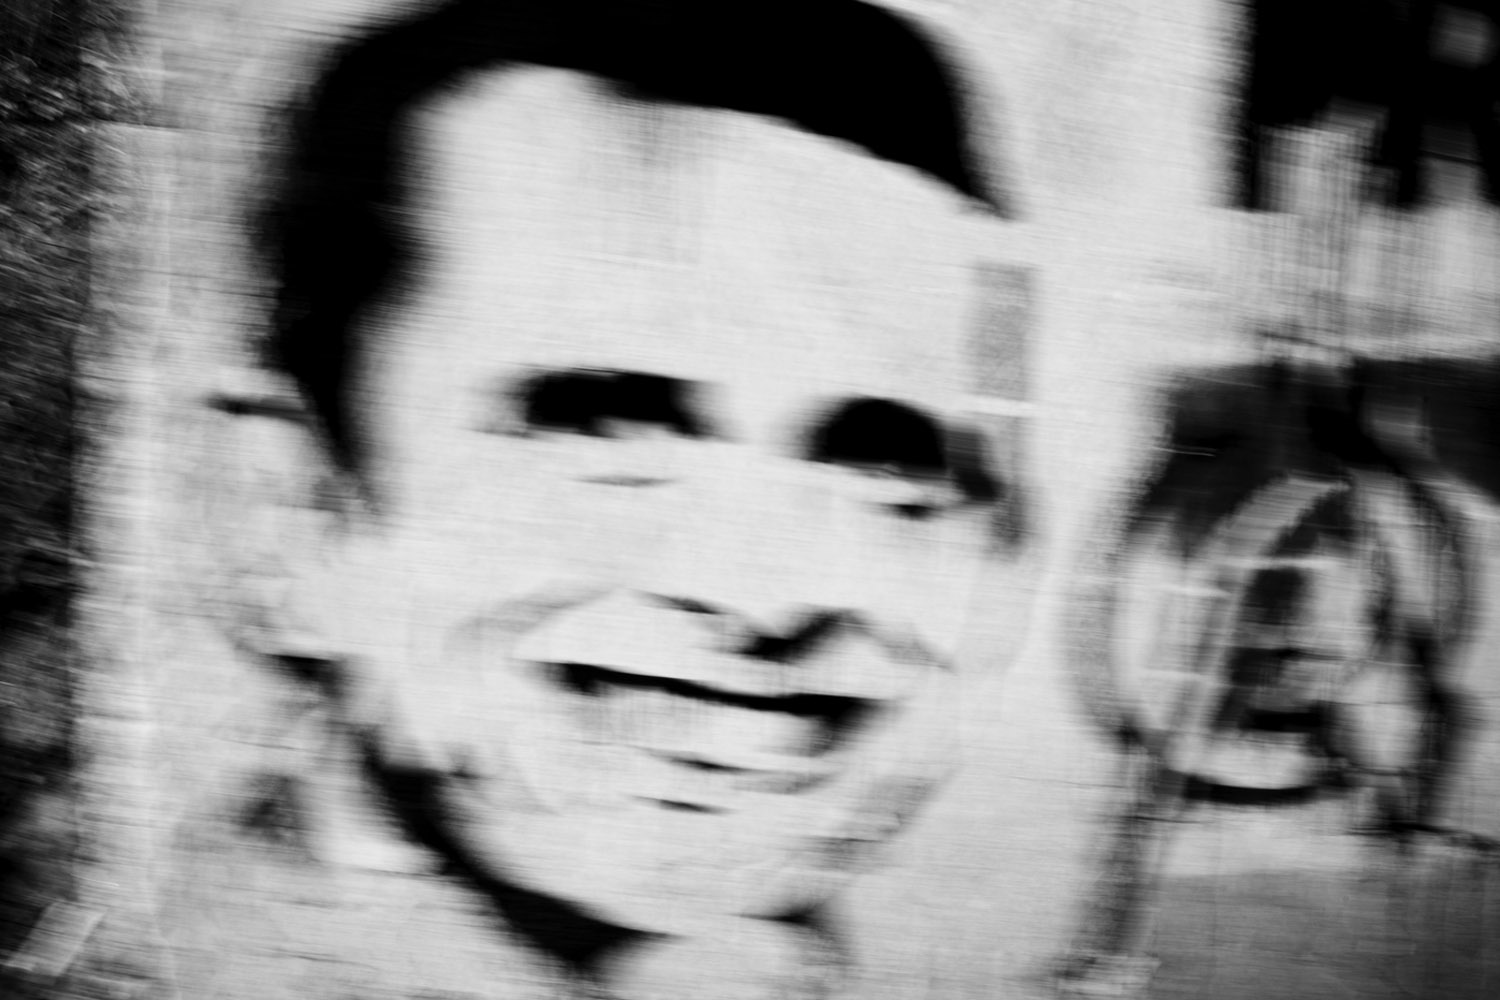 image: A stencil depicting Henrique Capriles Radonski, the presidential candidate for the opposition party. Political graffiti covers much of the city, serving as a constant reminder of the nation's political tensions.